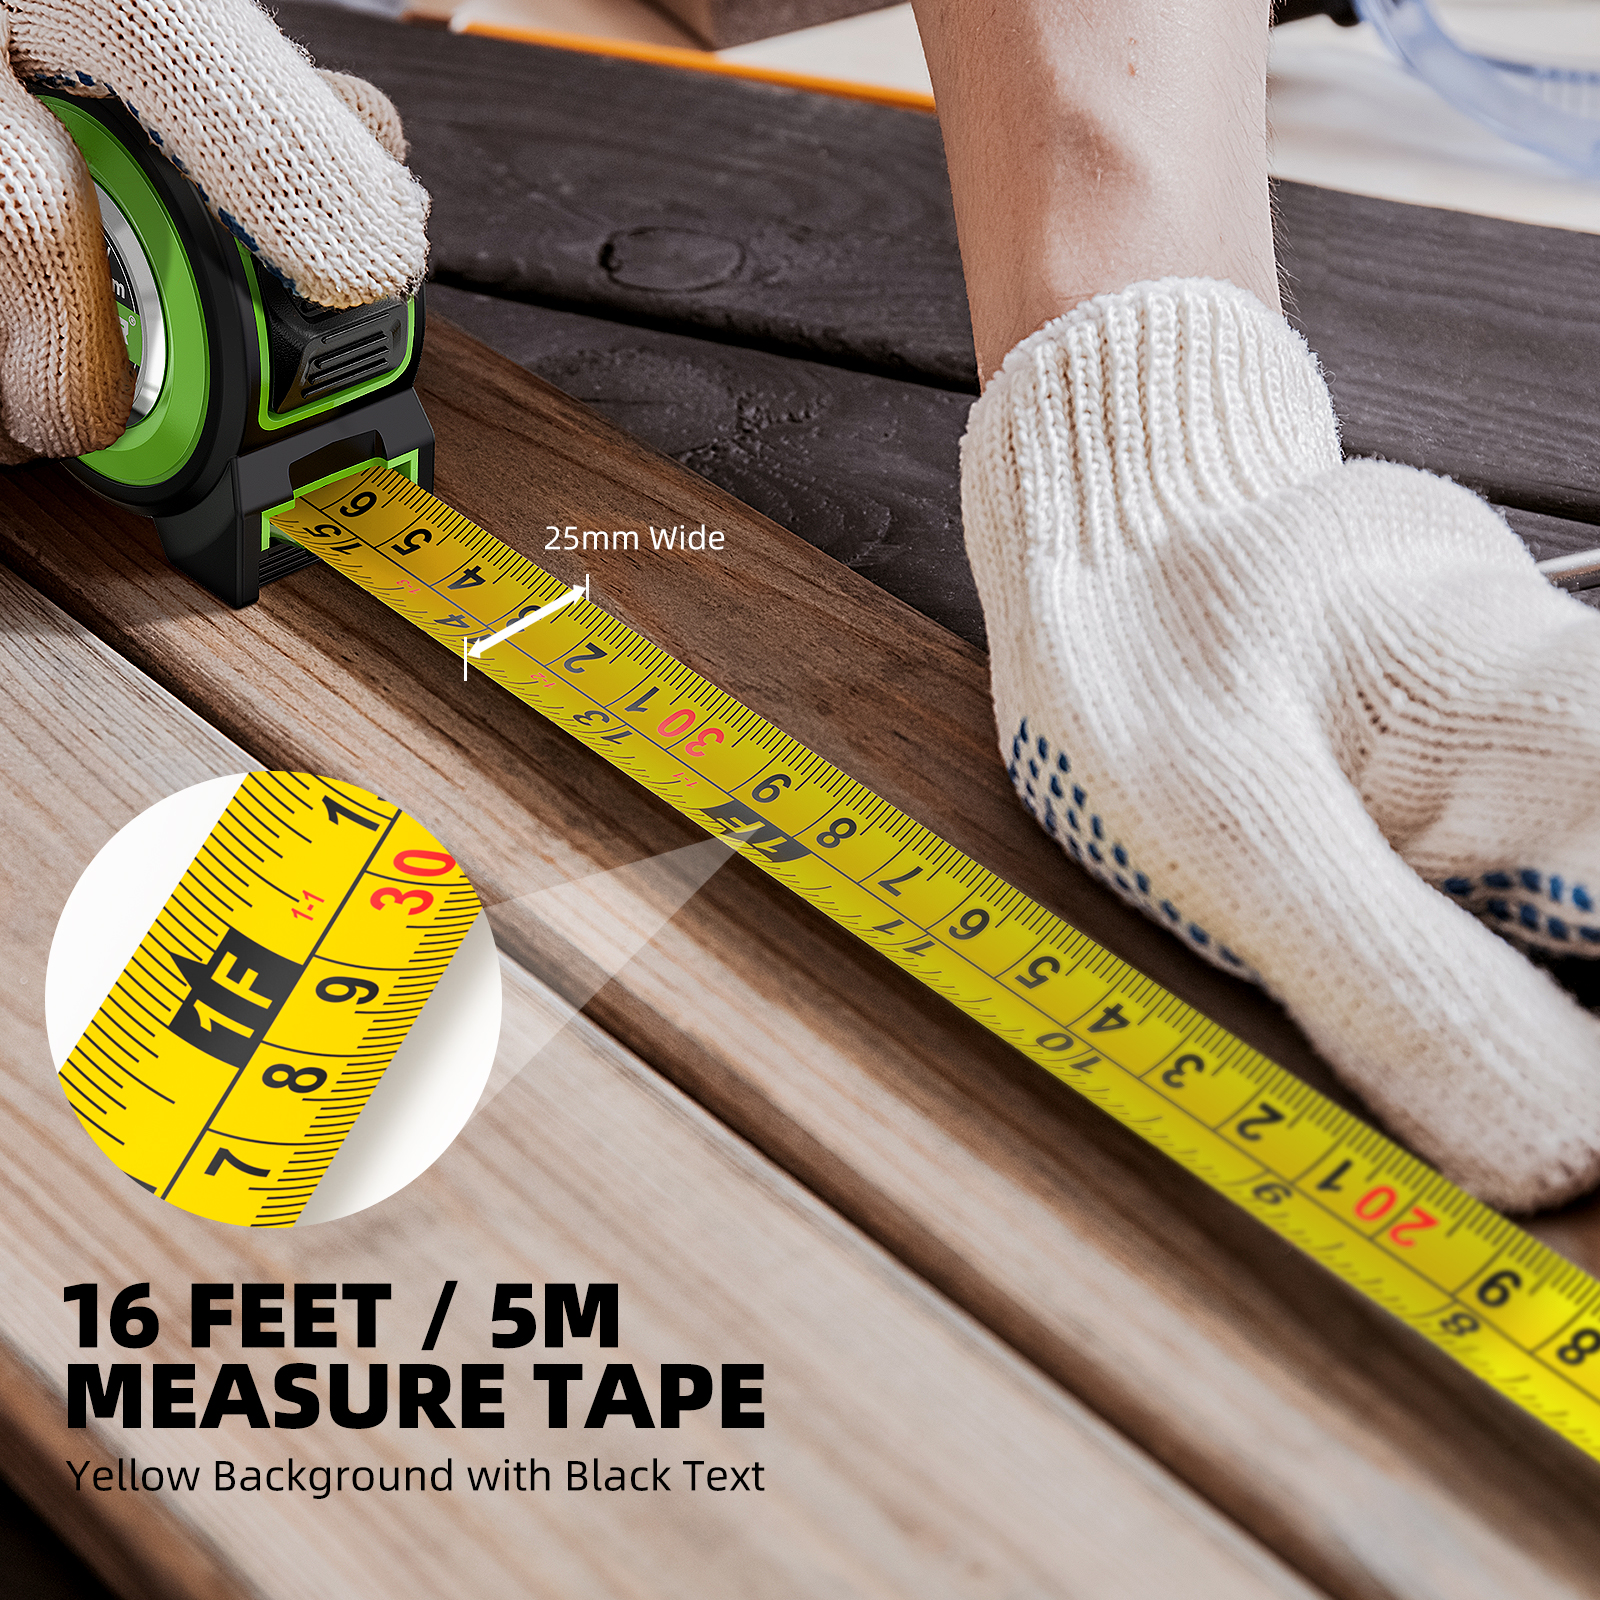 16Ft Tape Measure, 5M/16Feet Steel Retractable Tape Measure Self-Lock with Metric and Imperial Double Scale - image 3 of 10